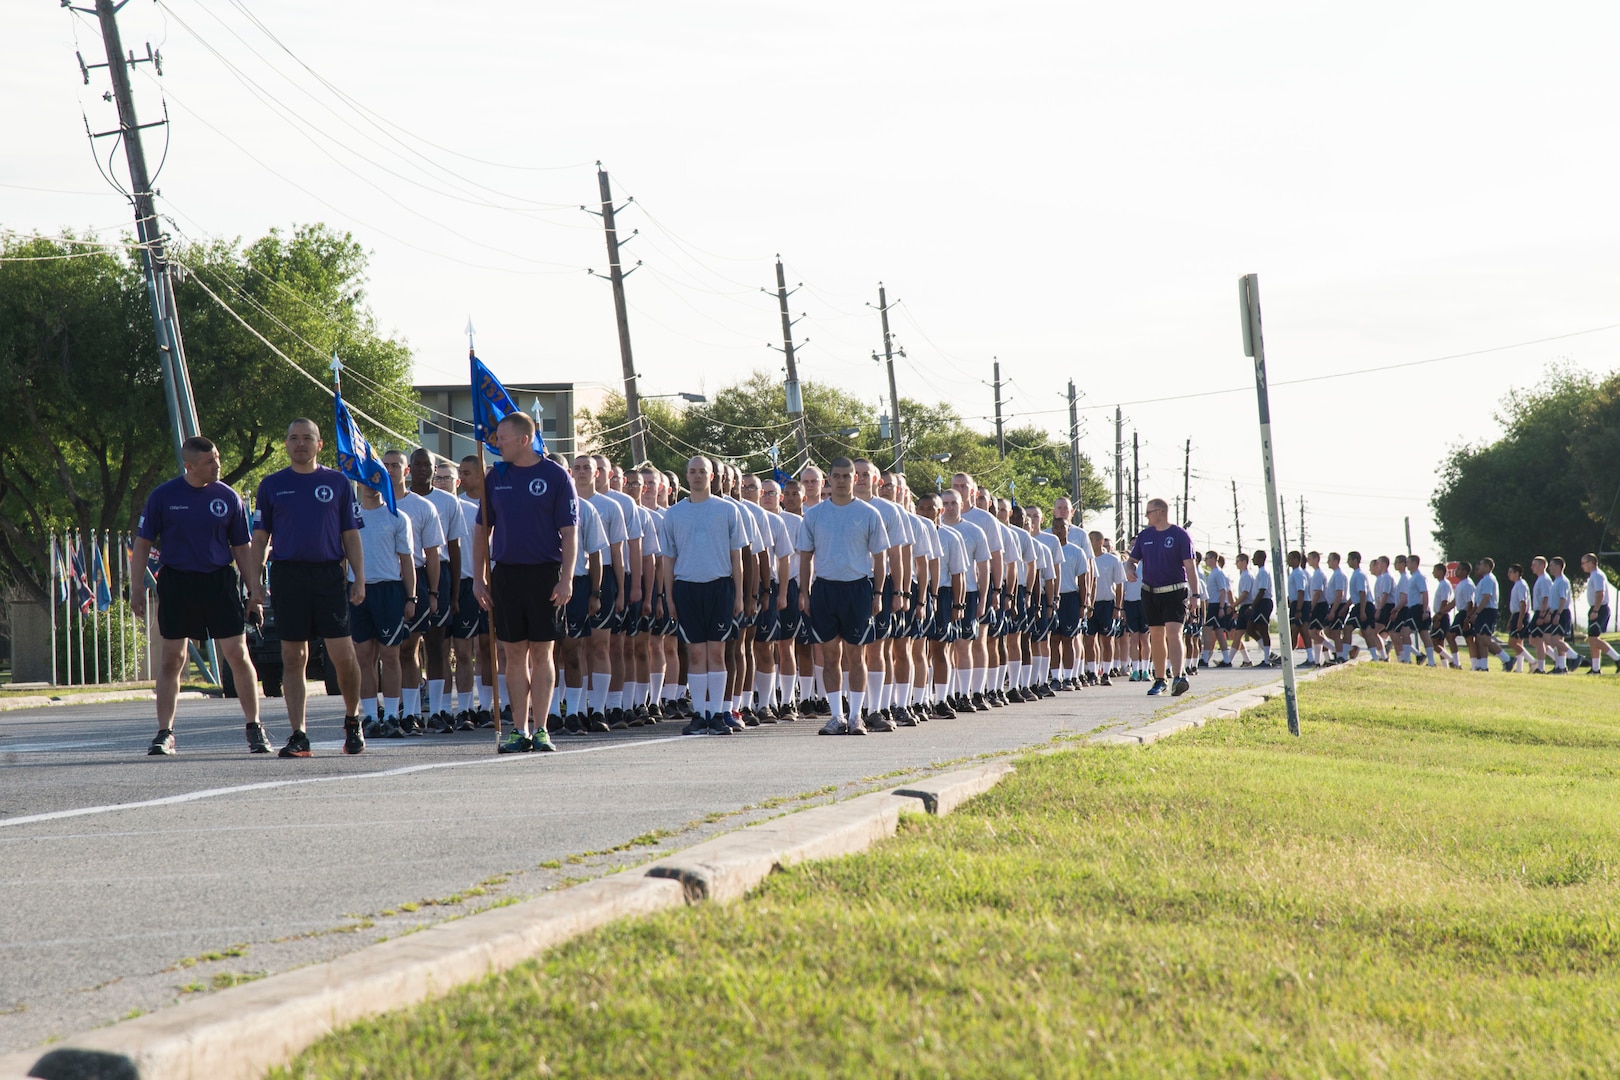 Lt. Col. Sammuel Berenguer, 324th Training Squadron commander, and Chief Master Sgt. Eric Gaona, 324th TRS superintendent, lead the squadron to the starting line for the Knights Day 5K on the 324th TRS physical training pad at Joint Base San Antonio-Lackland, Texas, March 25, 2017. The 5K run was the first hosted by a Basic Military Training Squadron. 